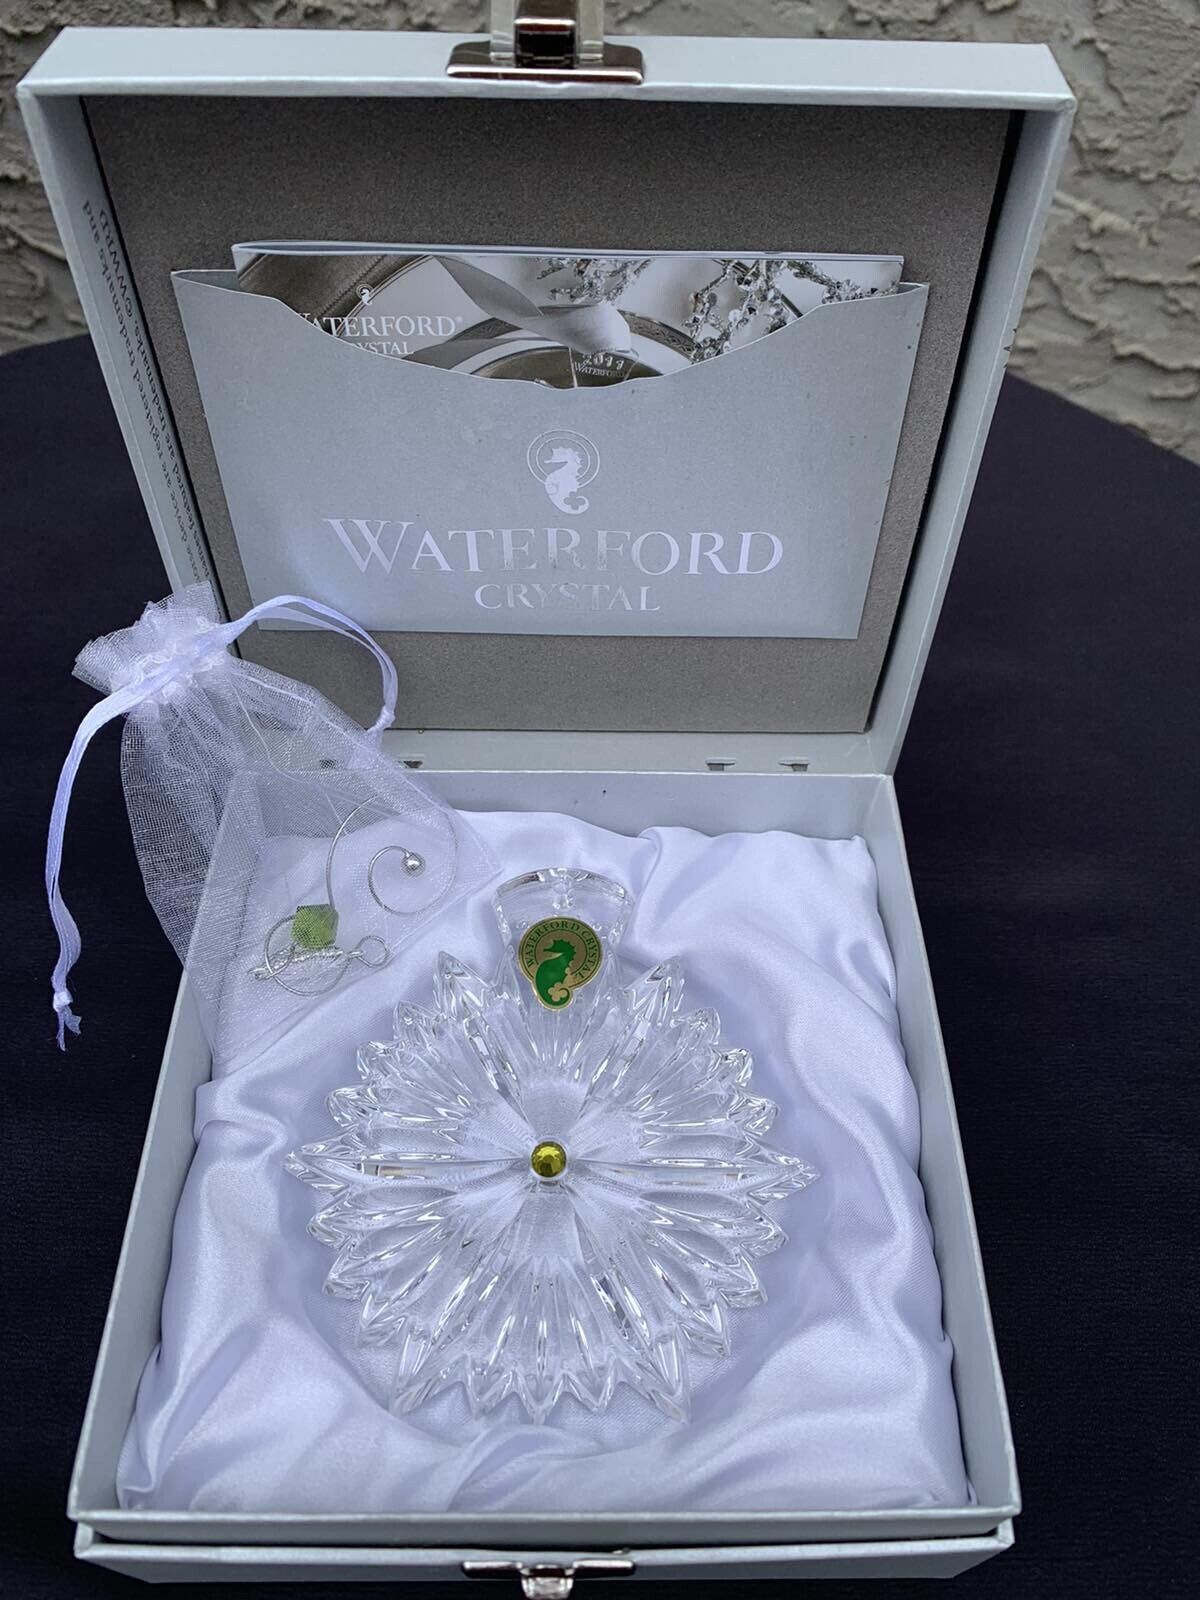 NIB Waterford Crystal Snowflake Wishes 2019 Lime Prosperity Ornament #40035509